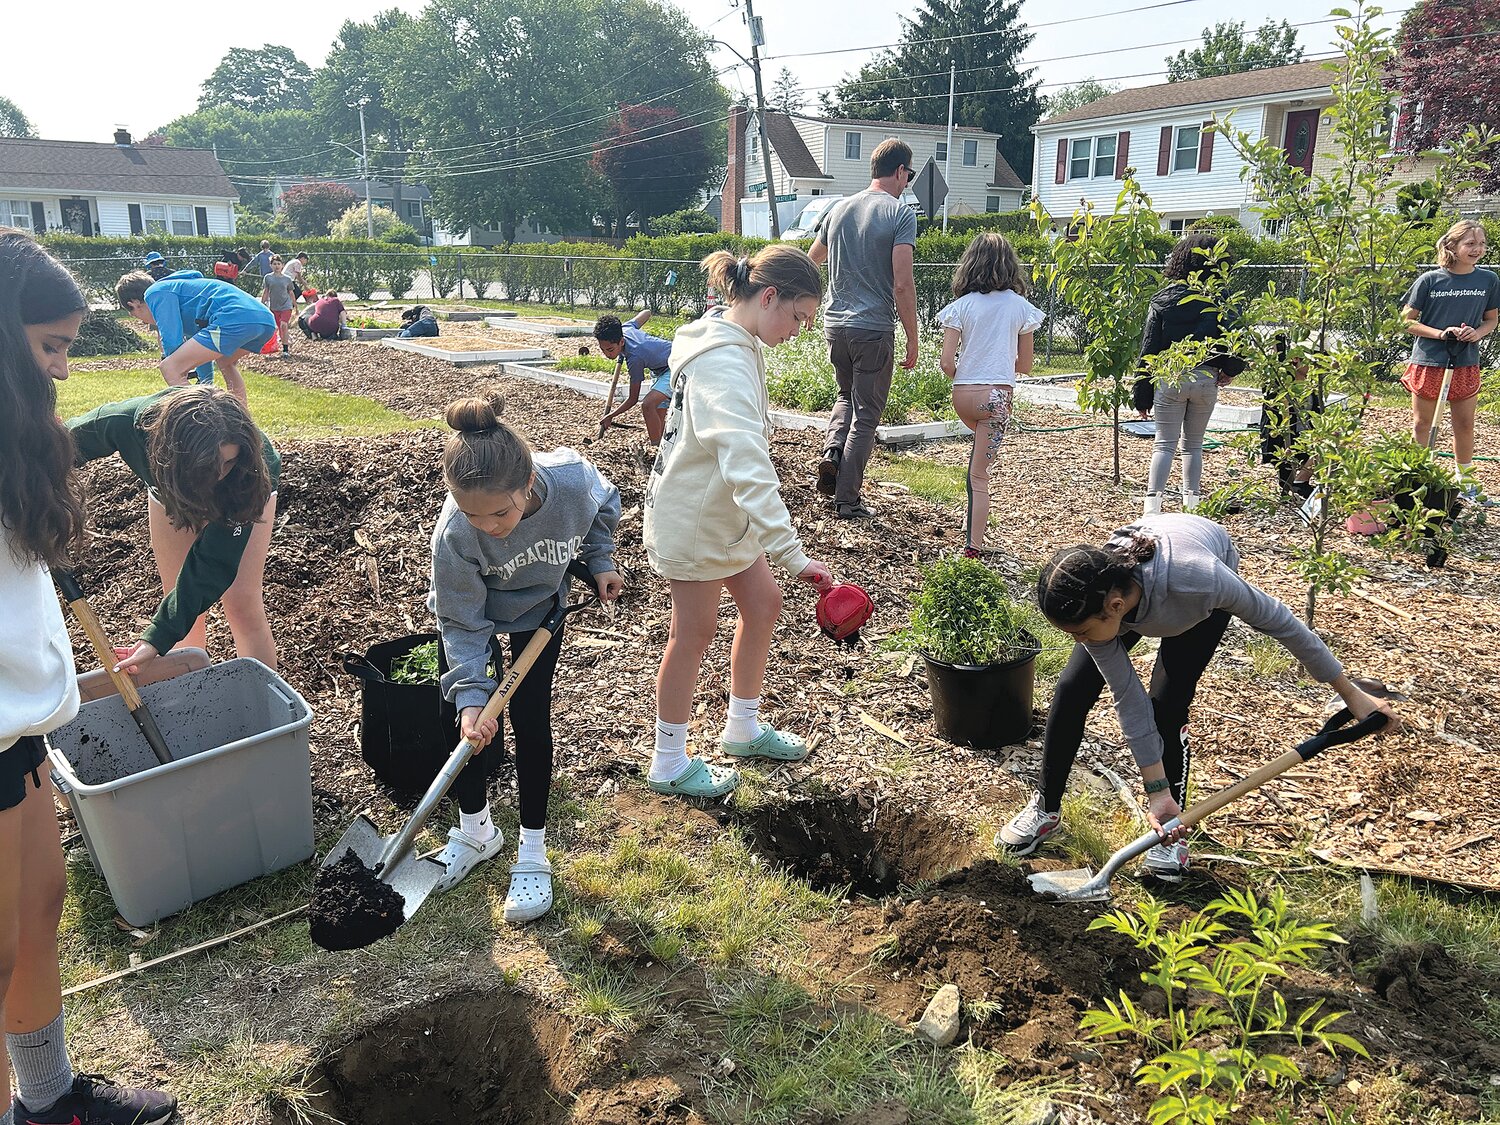 Middle school students tend to Gordon’s community garden, which is managed collaboratively by younger and older students working together.